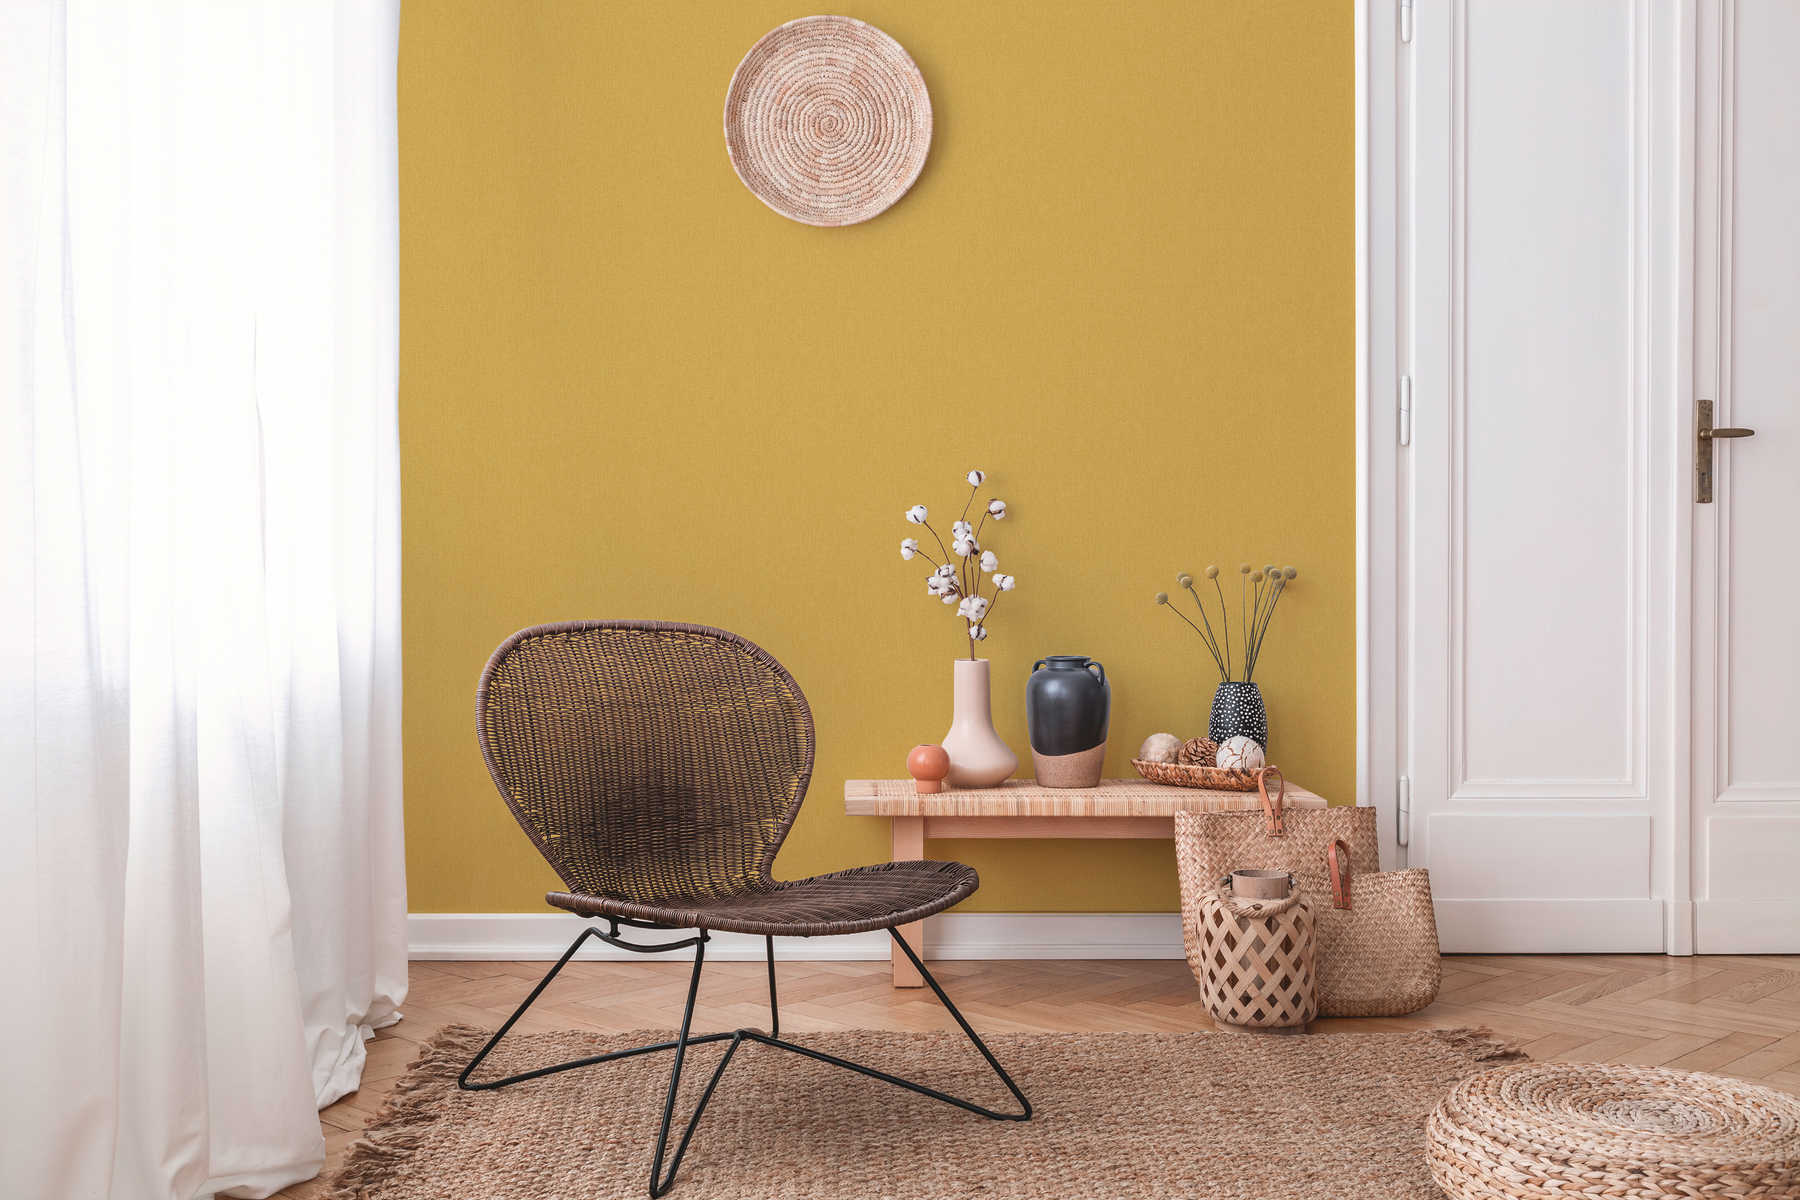             Plain wallpaper with textile look, colour mottled - yellow
        